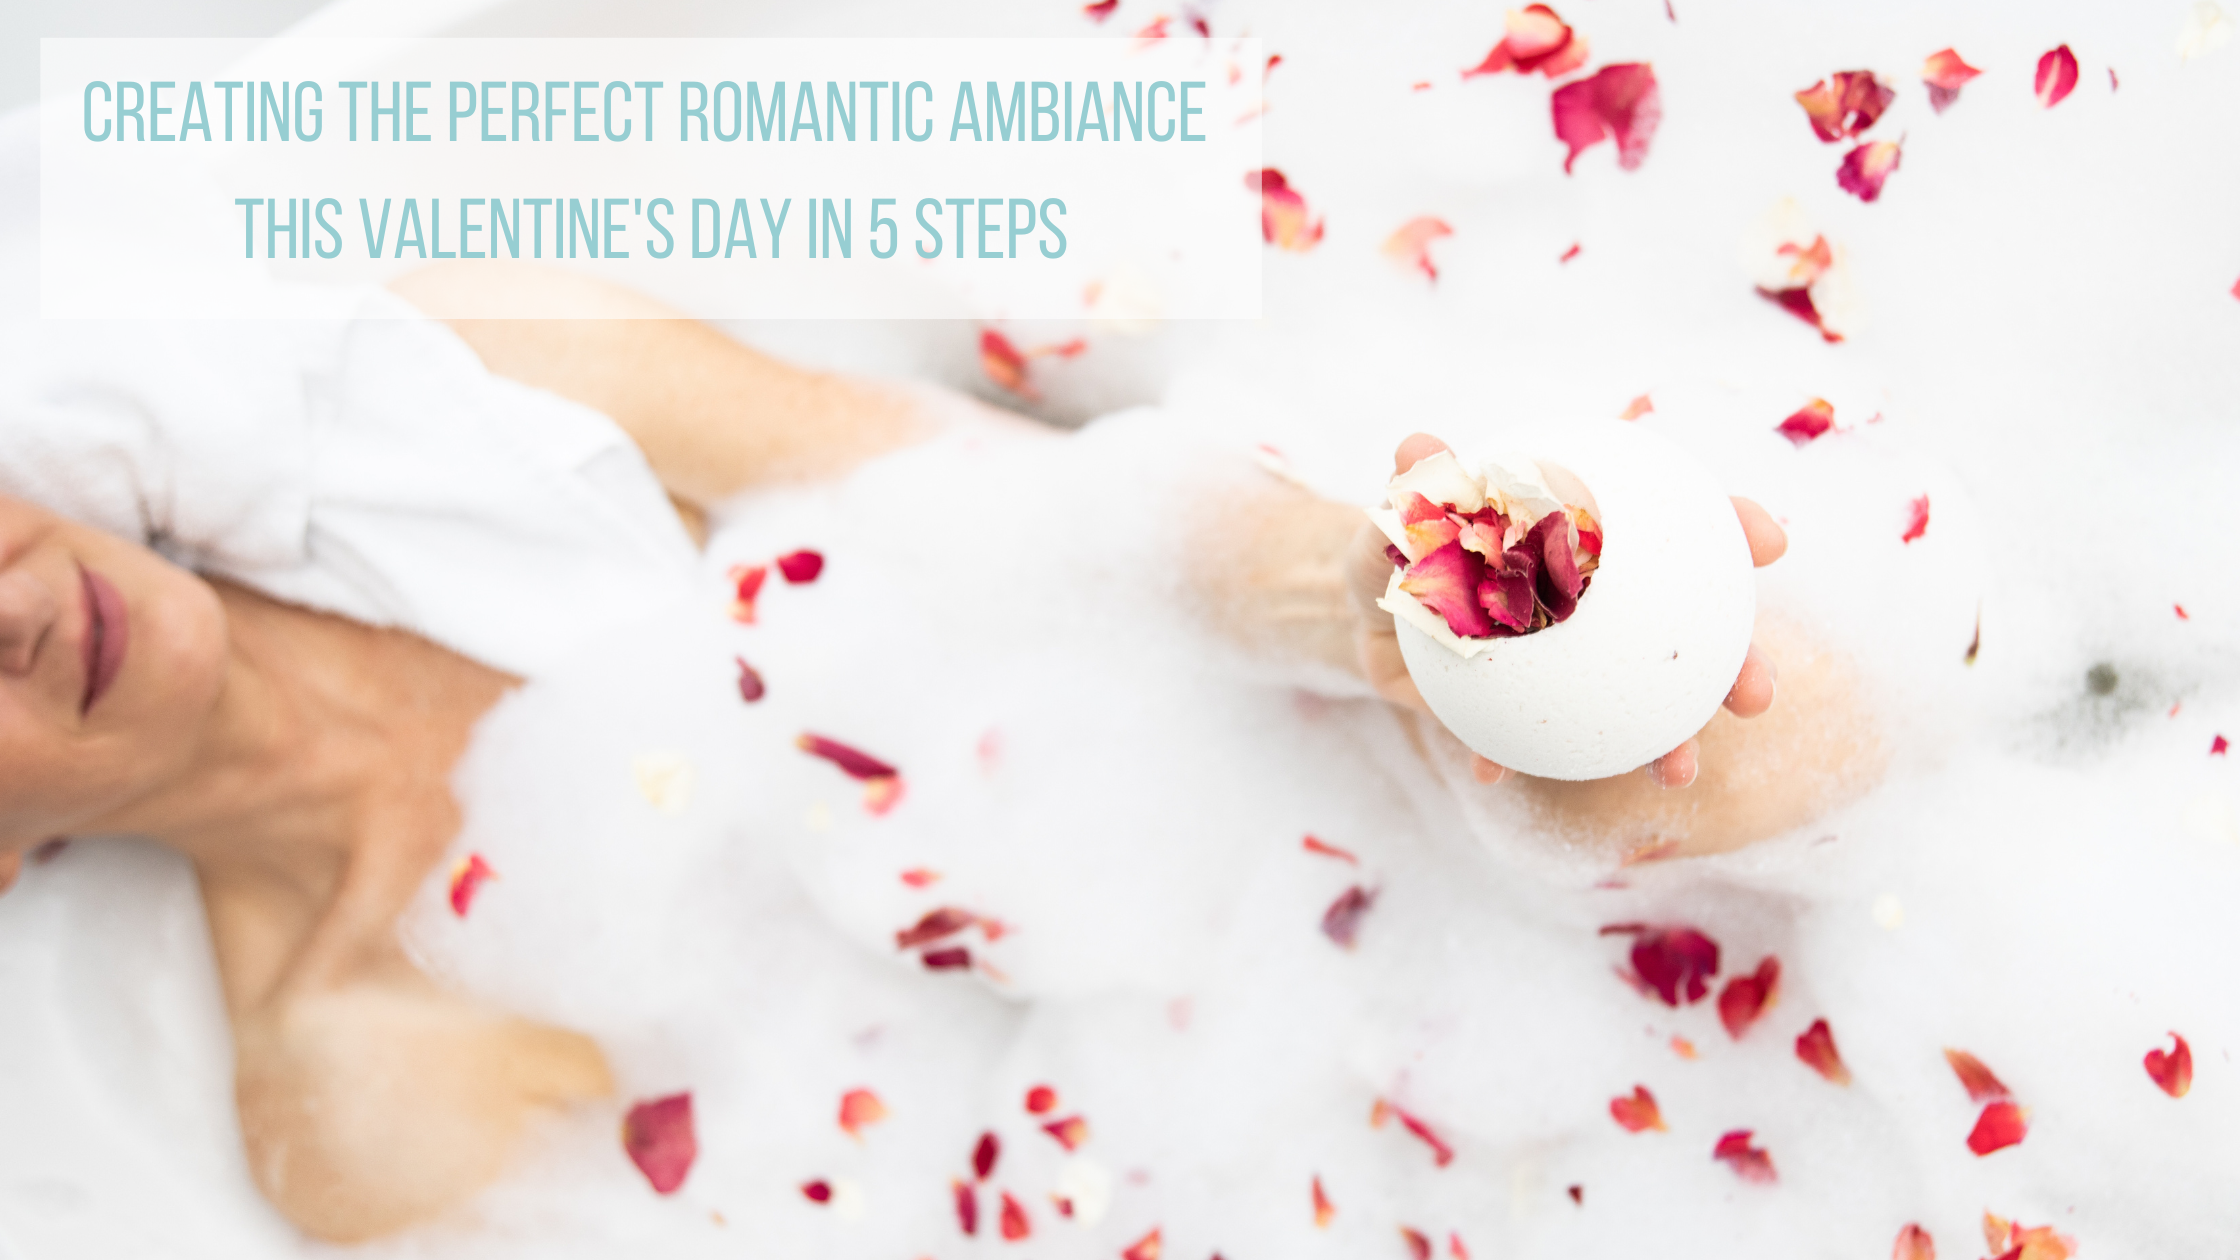 5 Steps to Creating the Perfect Romantic Ambiance This Valentine's Day